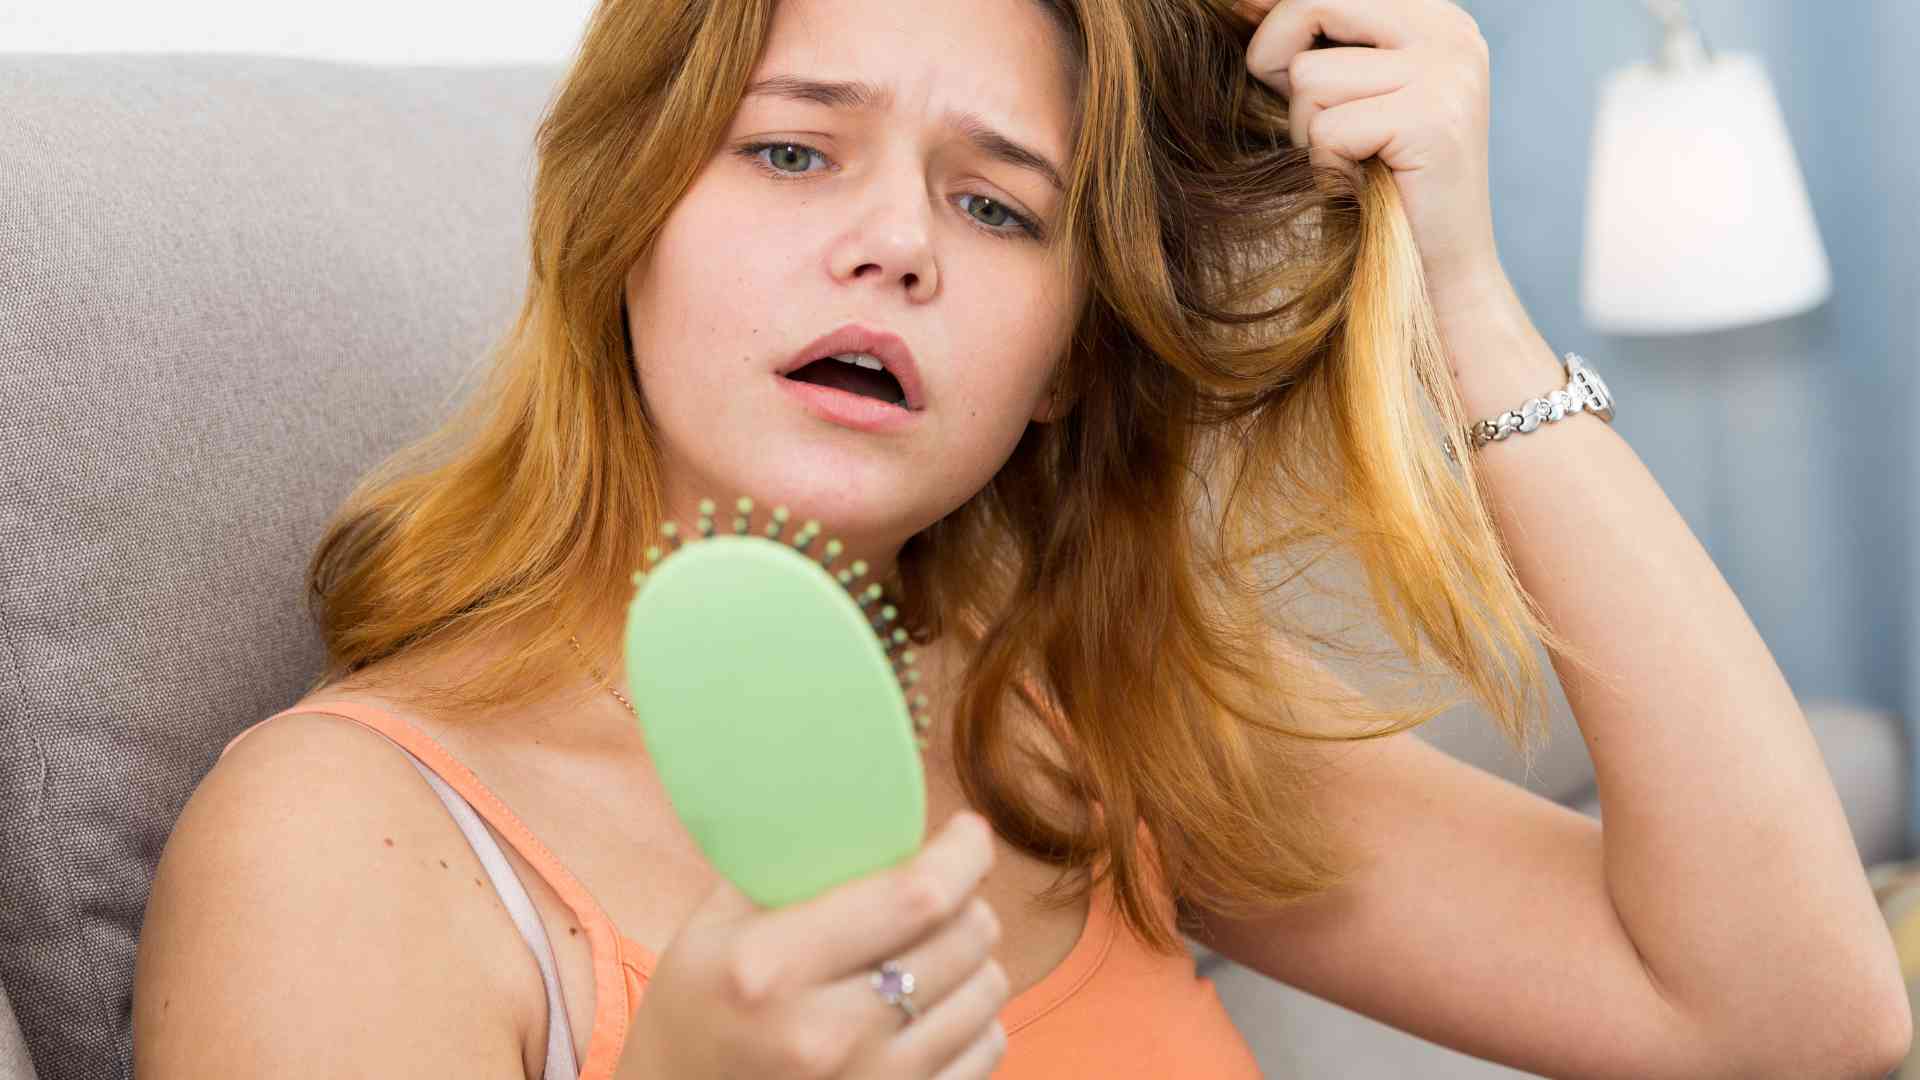 What lesser-known factors can contribute to hair loss in women